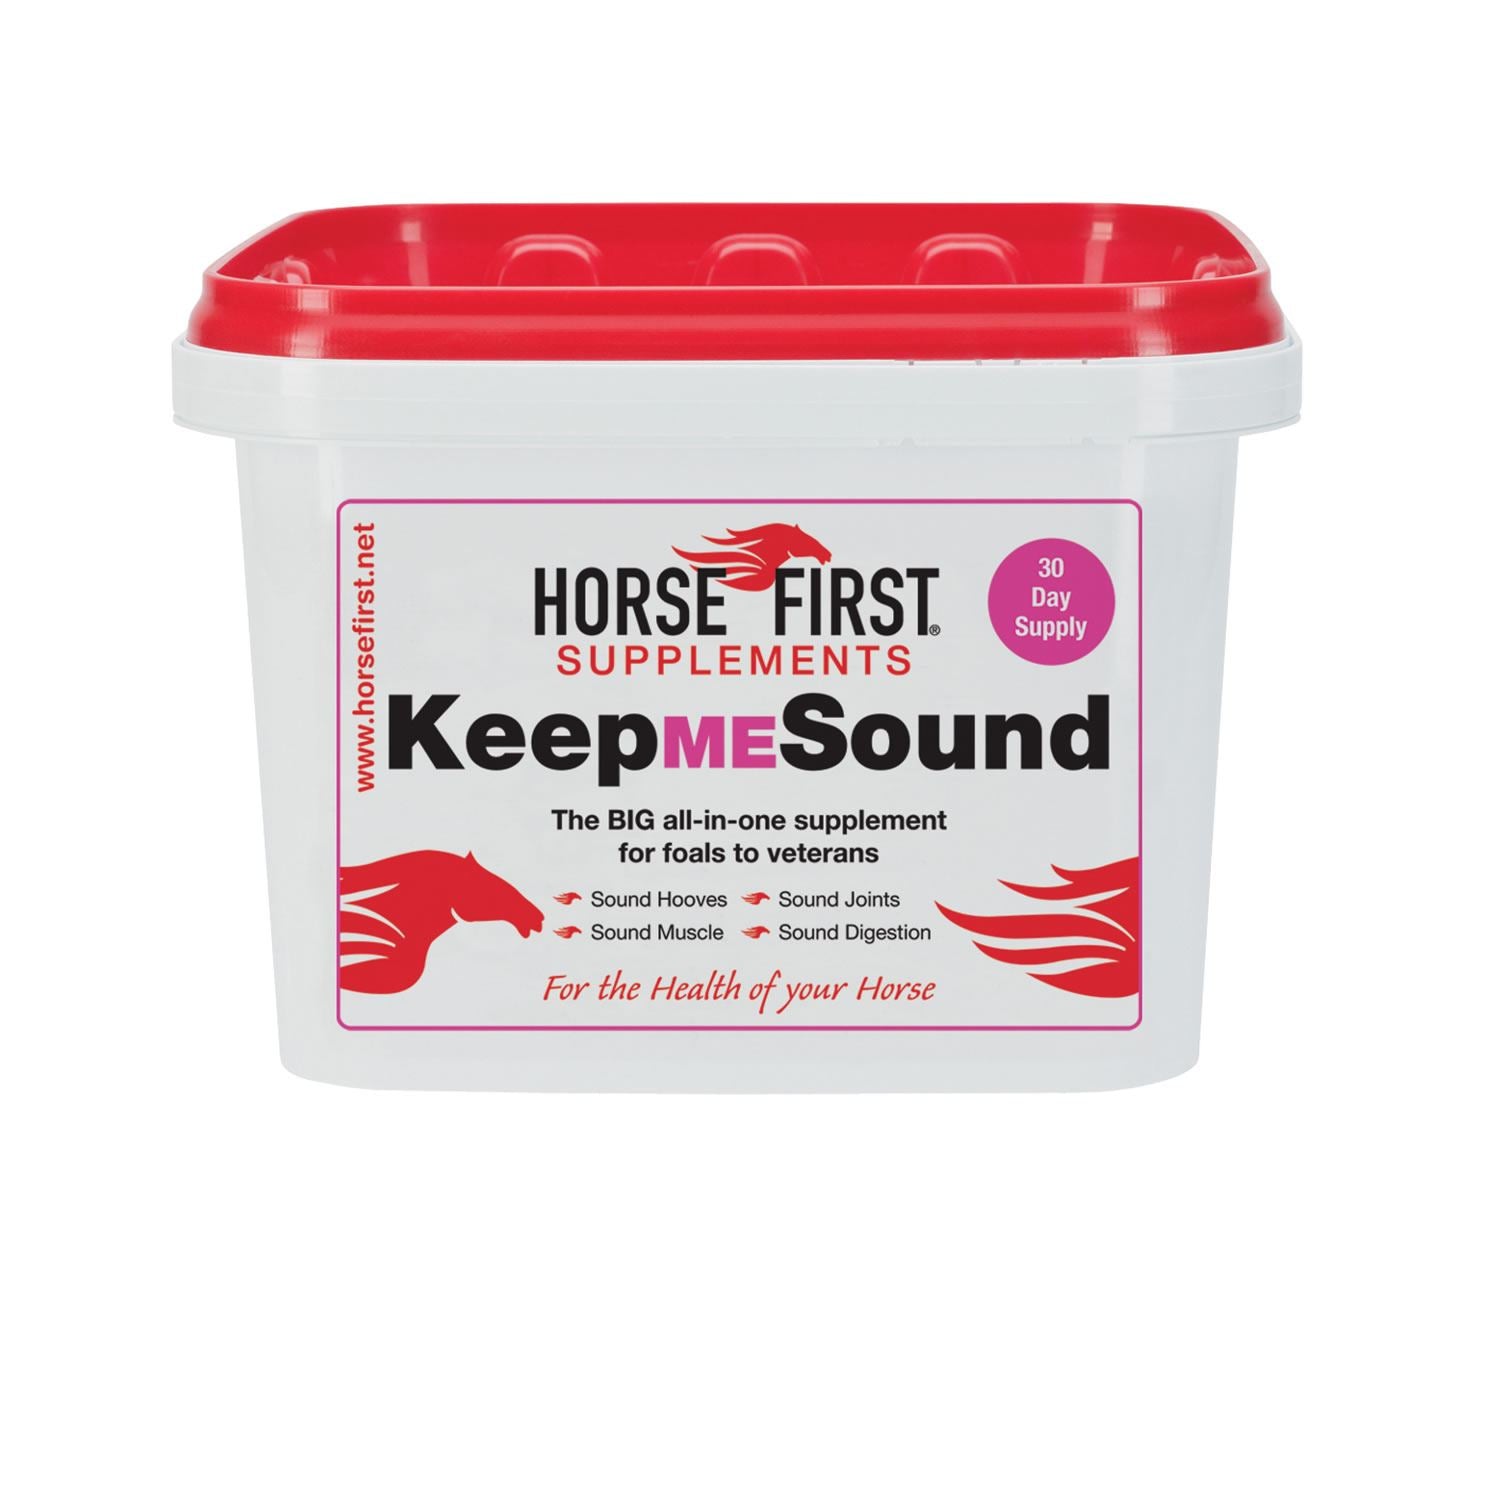 Horse First Keep Me Sound nurtures joints, hooves, coat, and digestive system